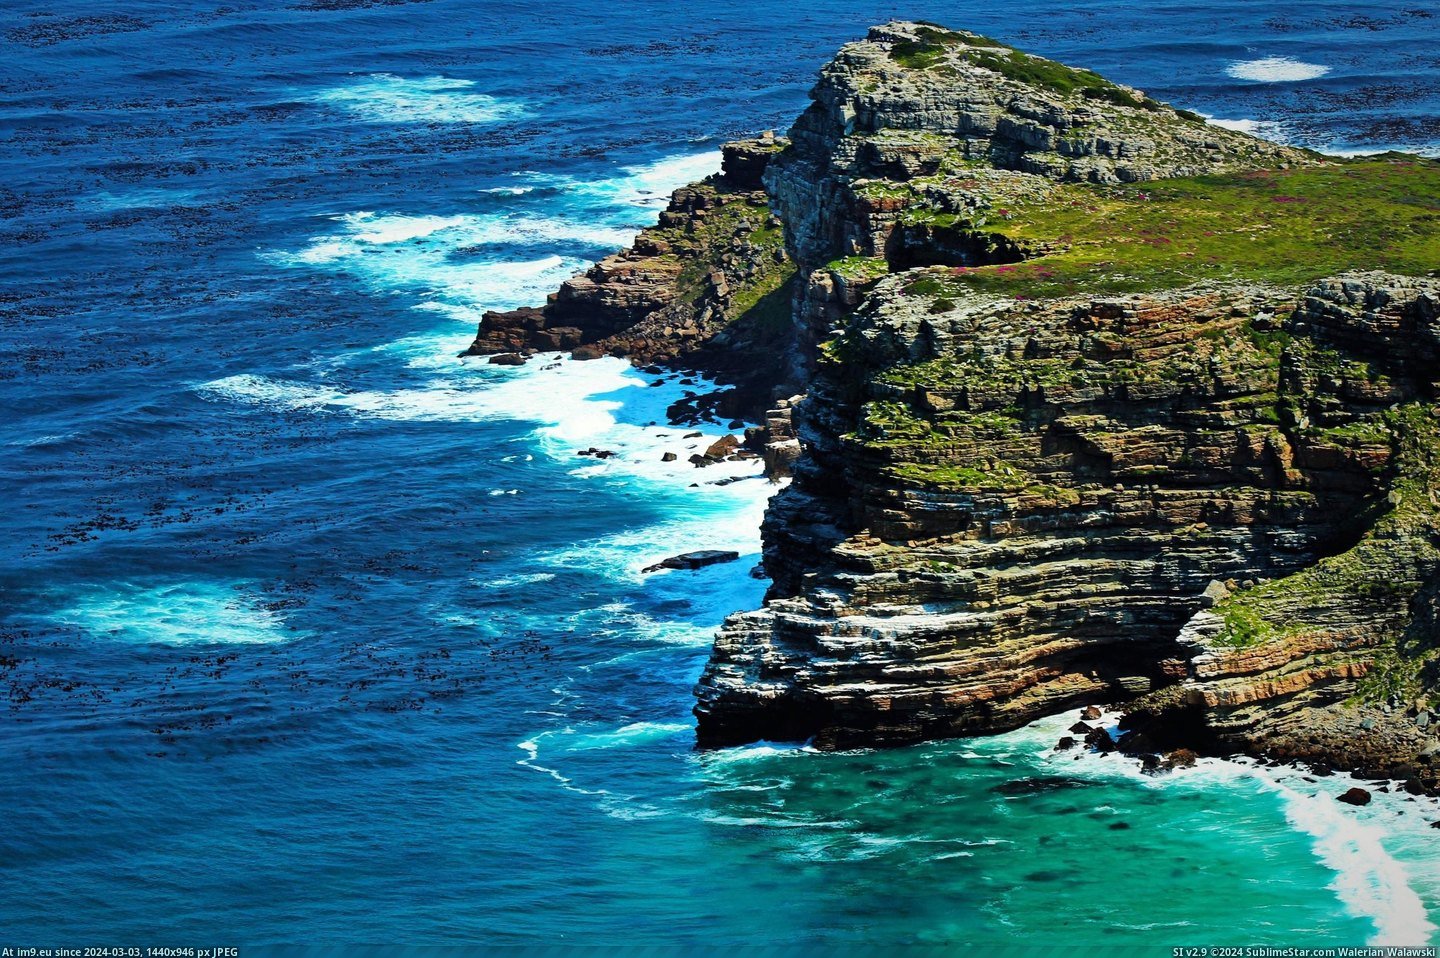 #Good #Beautiful #May #Africa #Cape #Southern #Tip #Hope #South #Place [Earthporn] Cape of Good Hope may not be the most southern tip of Africa but it is indeed a beautiful place, South Africa  [2603 Pic. (Изображение из альбом My r/EARTHPORN favs))